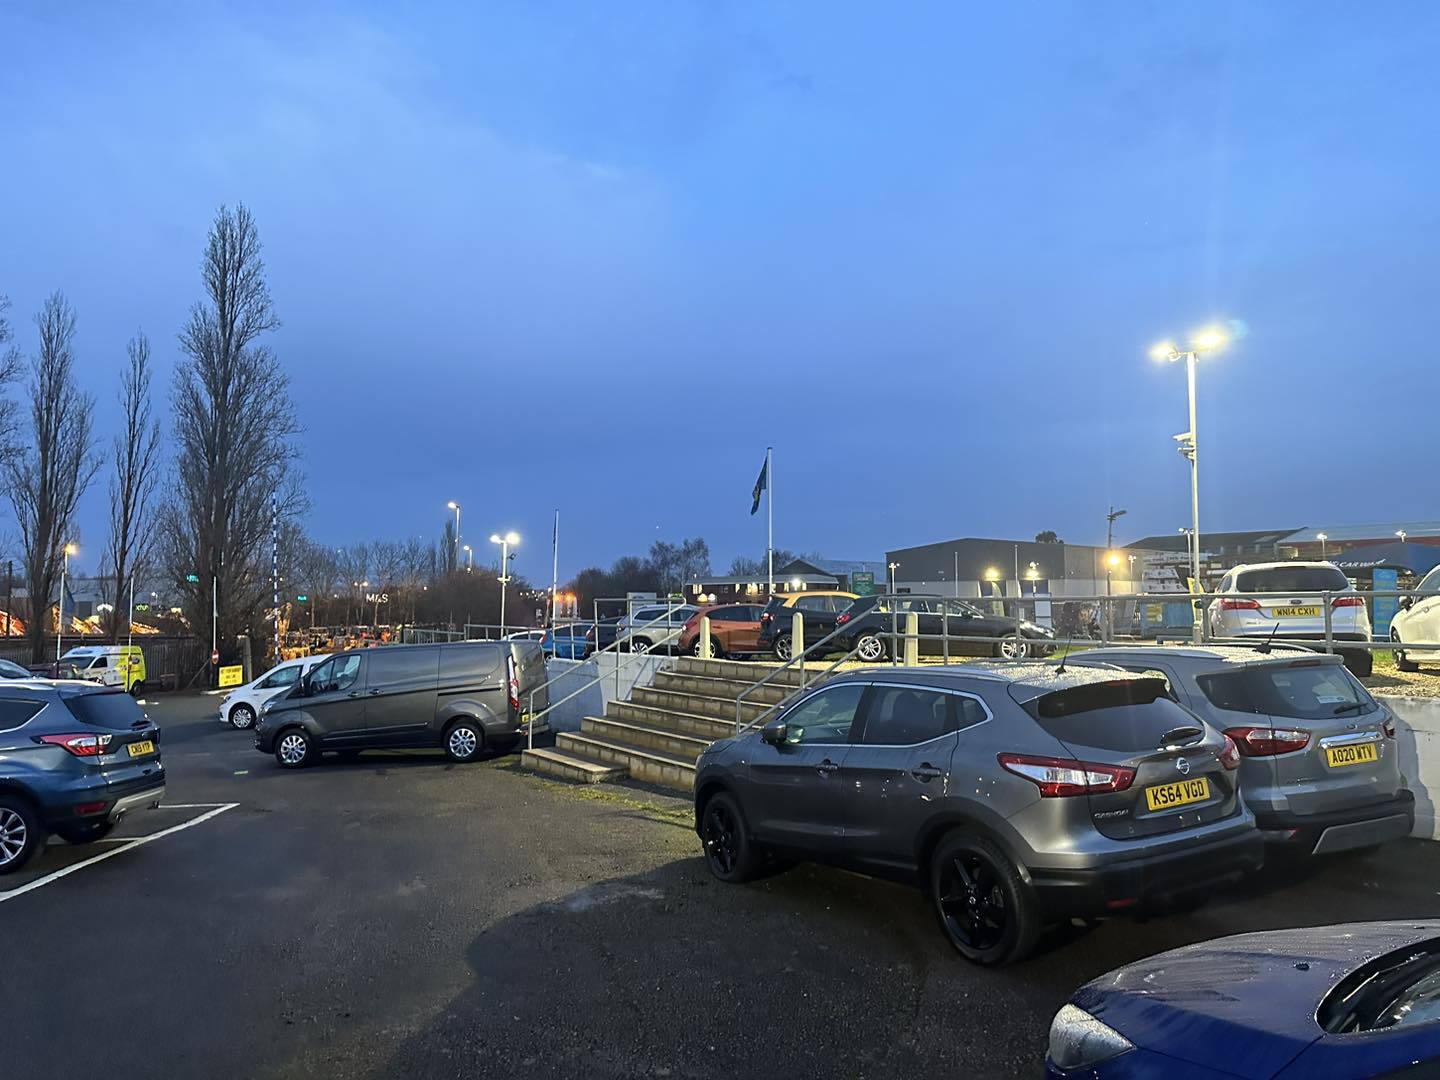 Forecourt lighting at the Winslow Ford car dealership in Northamptonshire.